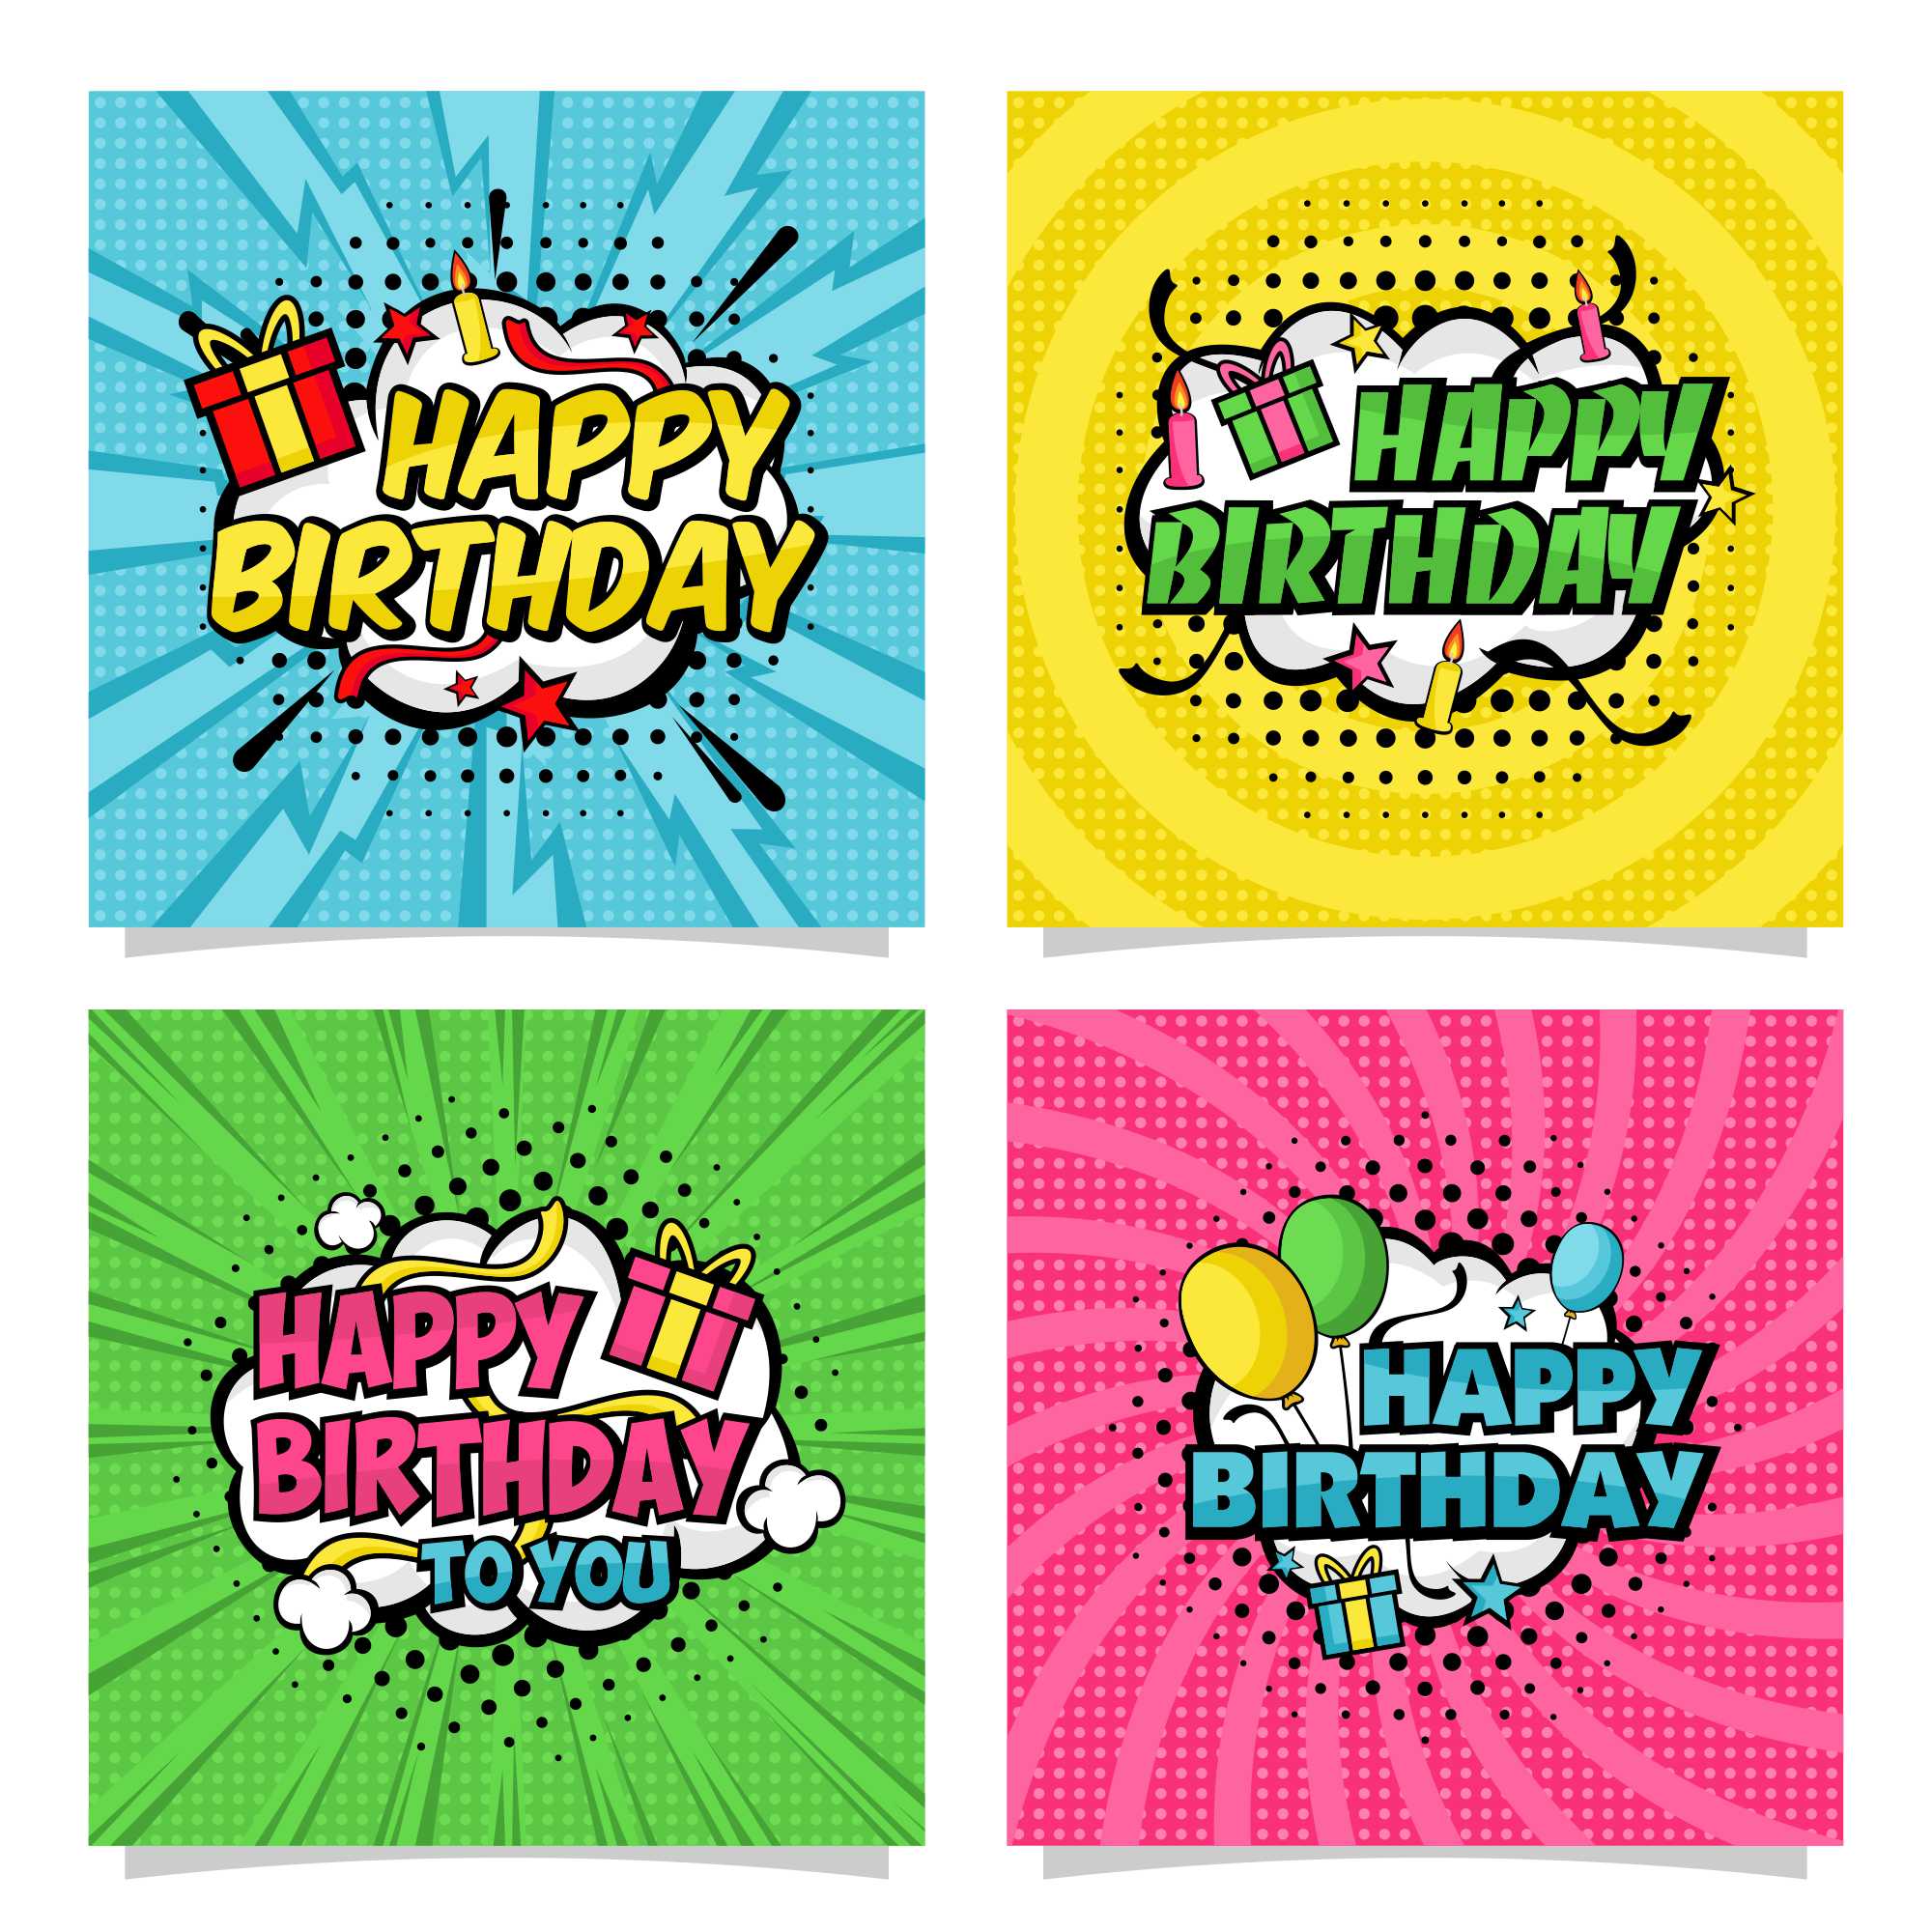 Happy birthday Pop art style collection - $5 cover image.